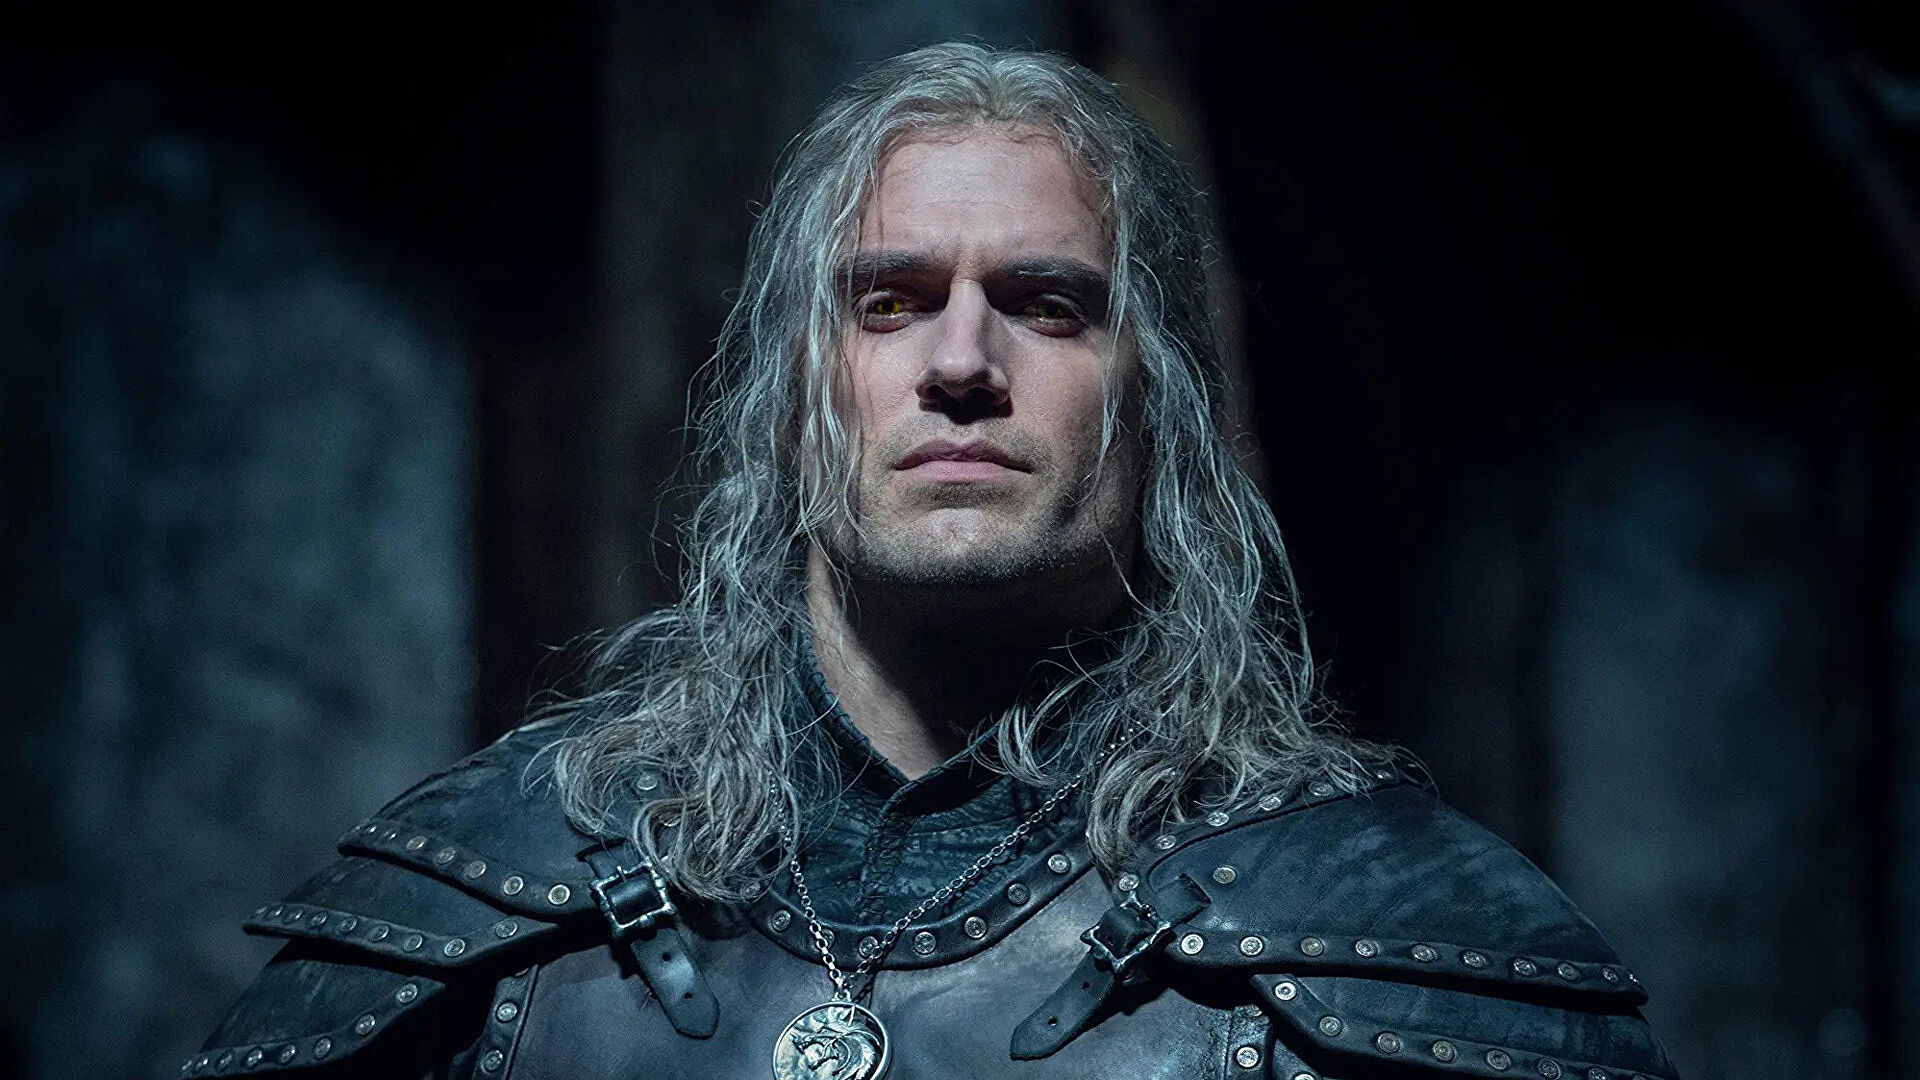 Netflix’s The Witcher series says goodbye to Henry Cavill, with Geralt recast for season four